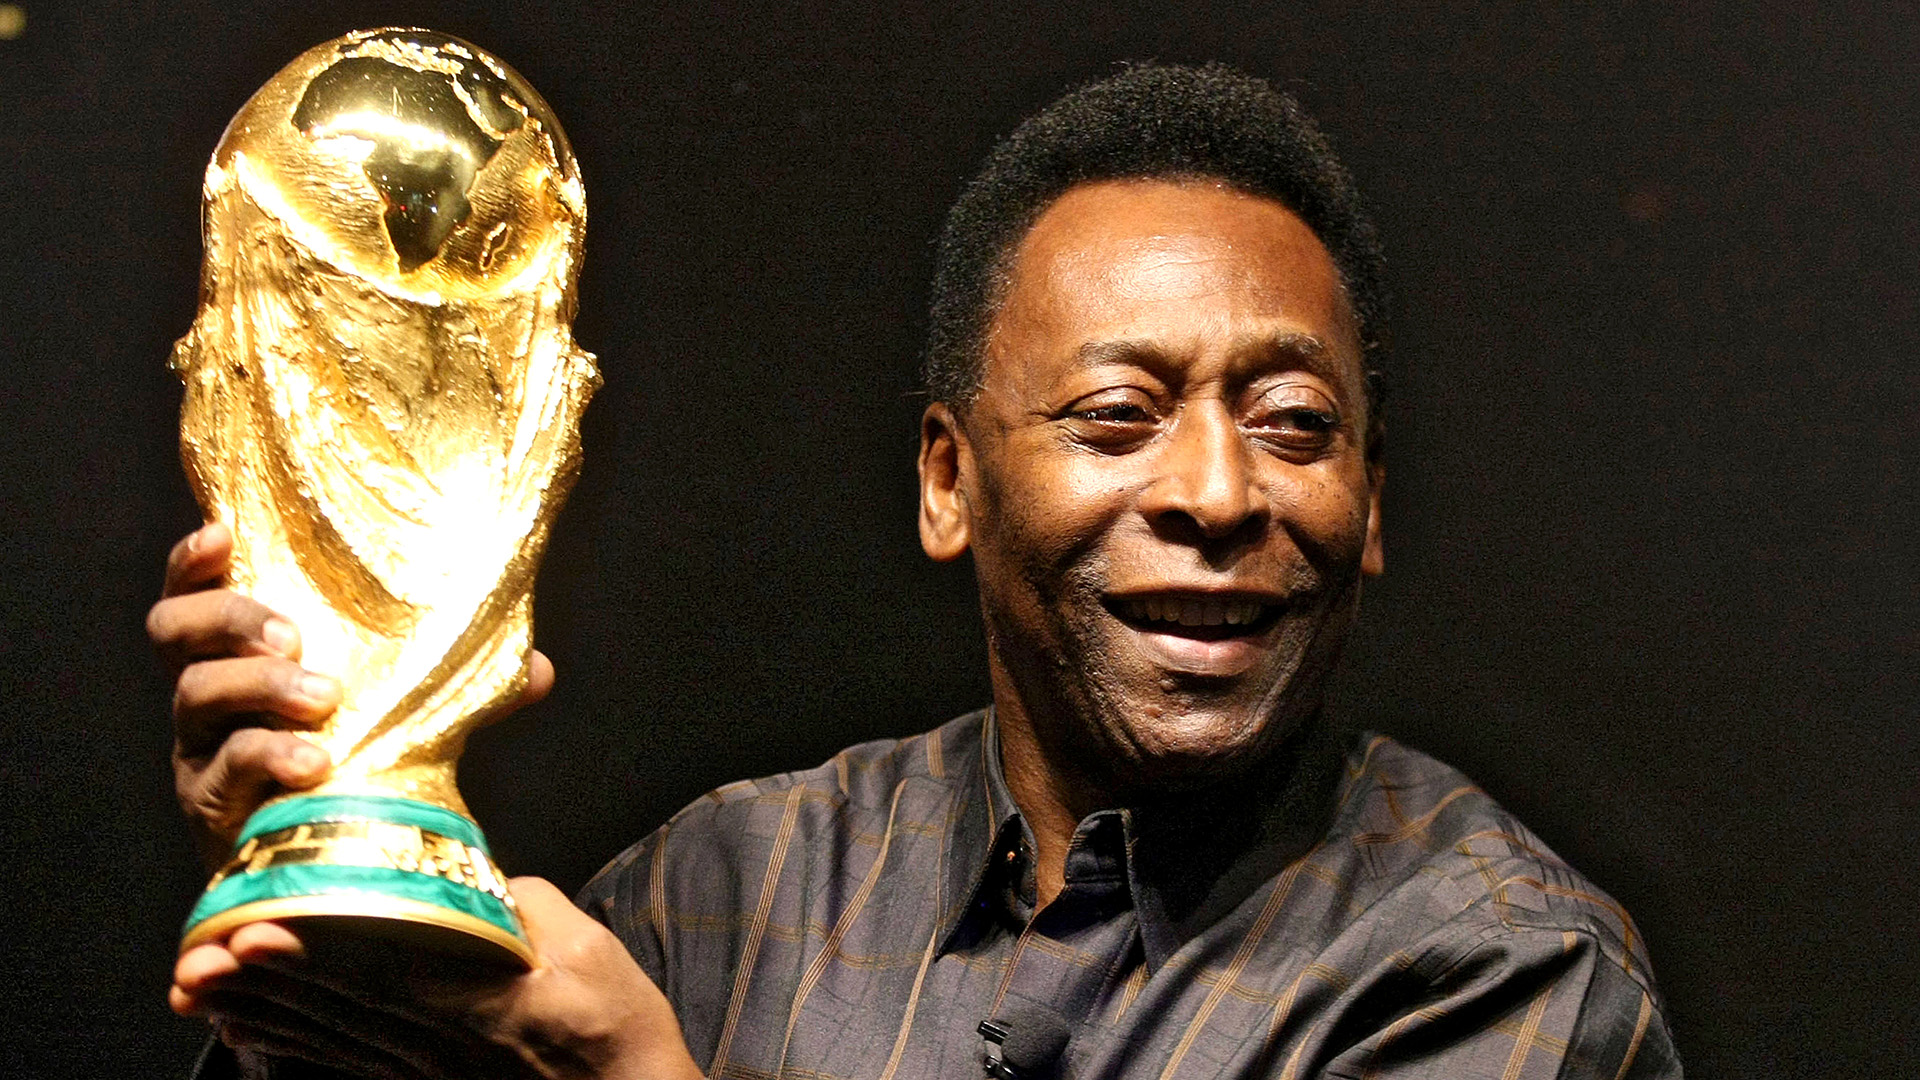 Pele is the only football, player to ever win the World Cup trophy thrice after doing that with Brazil in 1958, 1962, and 1970.